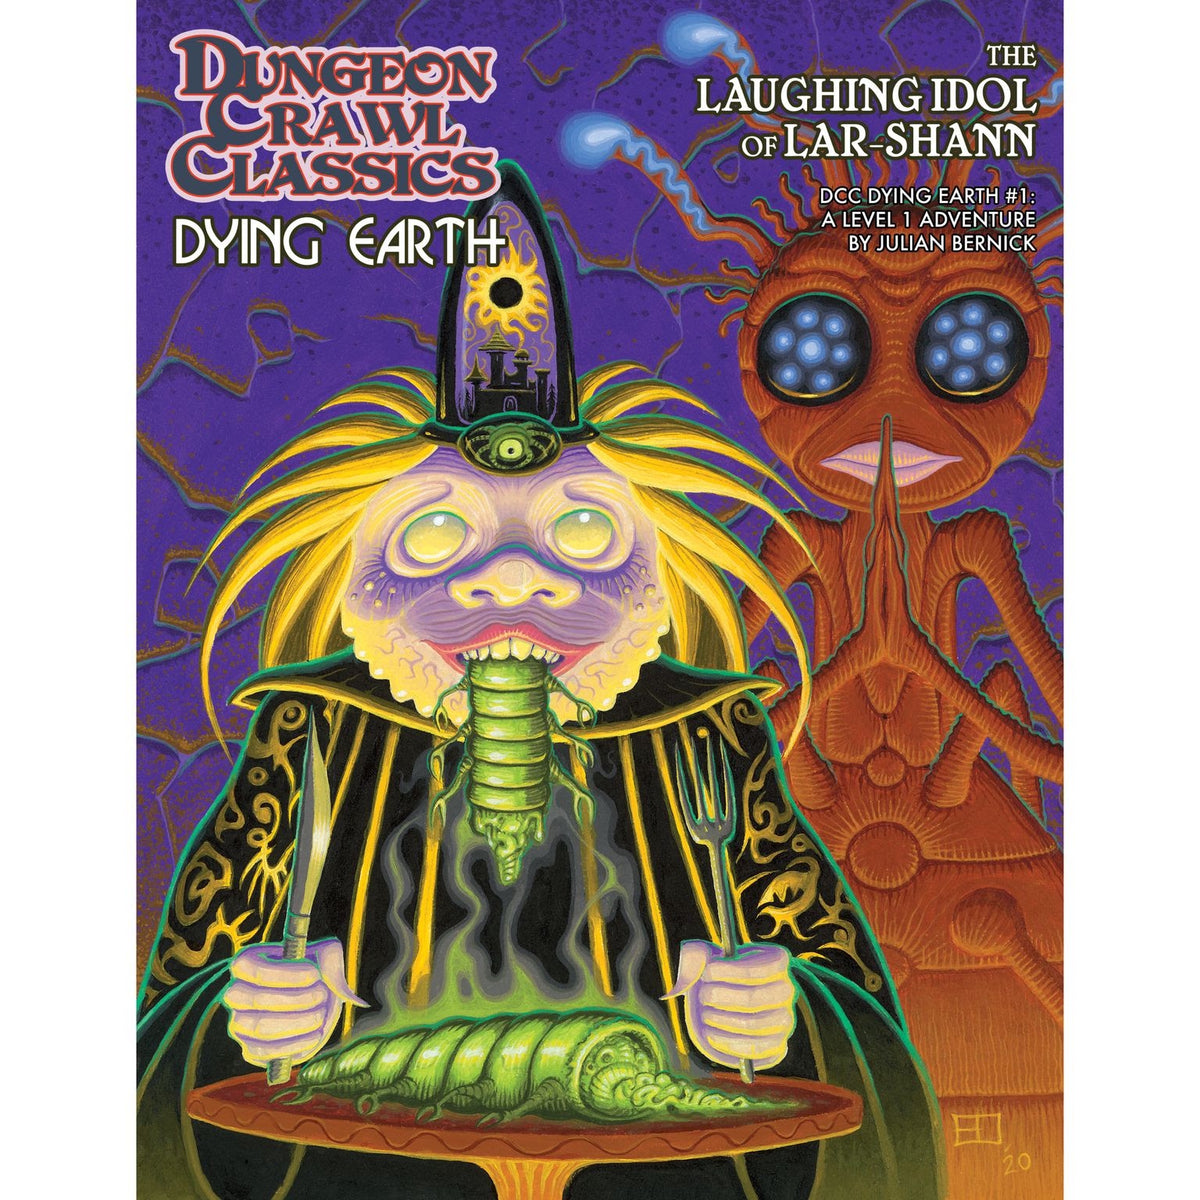 Dungeon Crawl Classics Dying Earth #1: The Laughing Idol of Lar-Shan